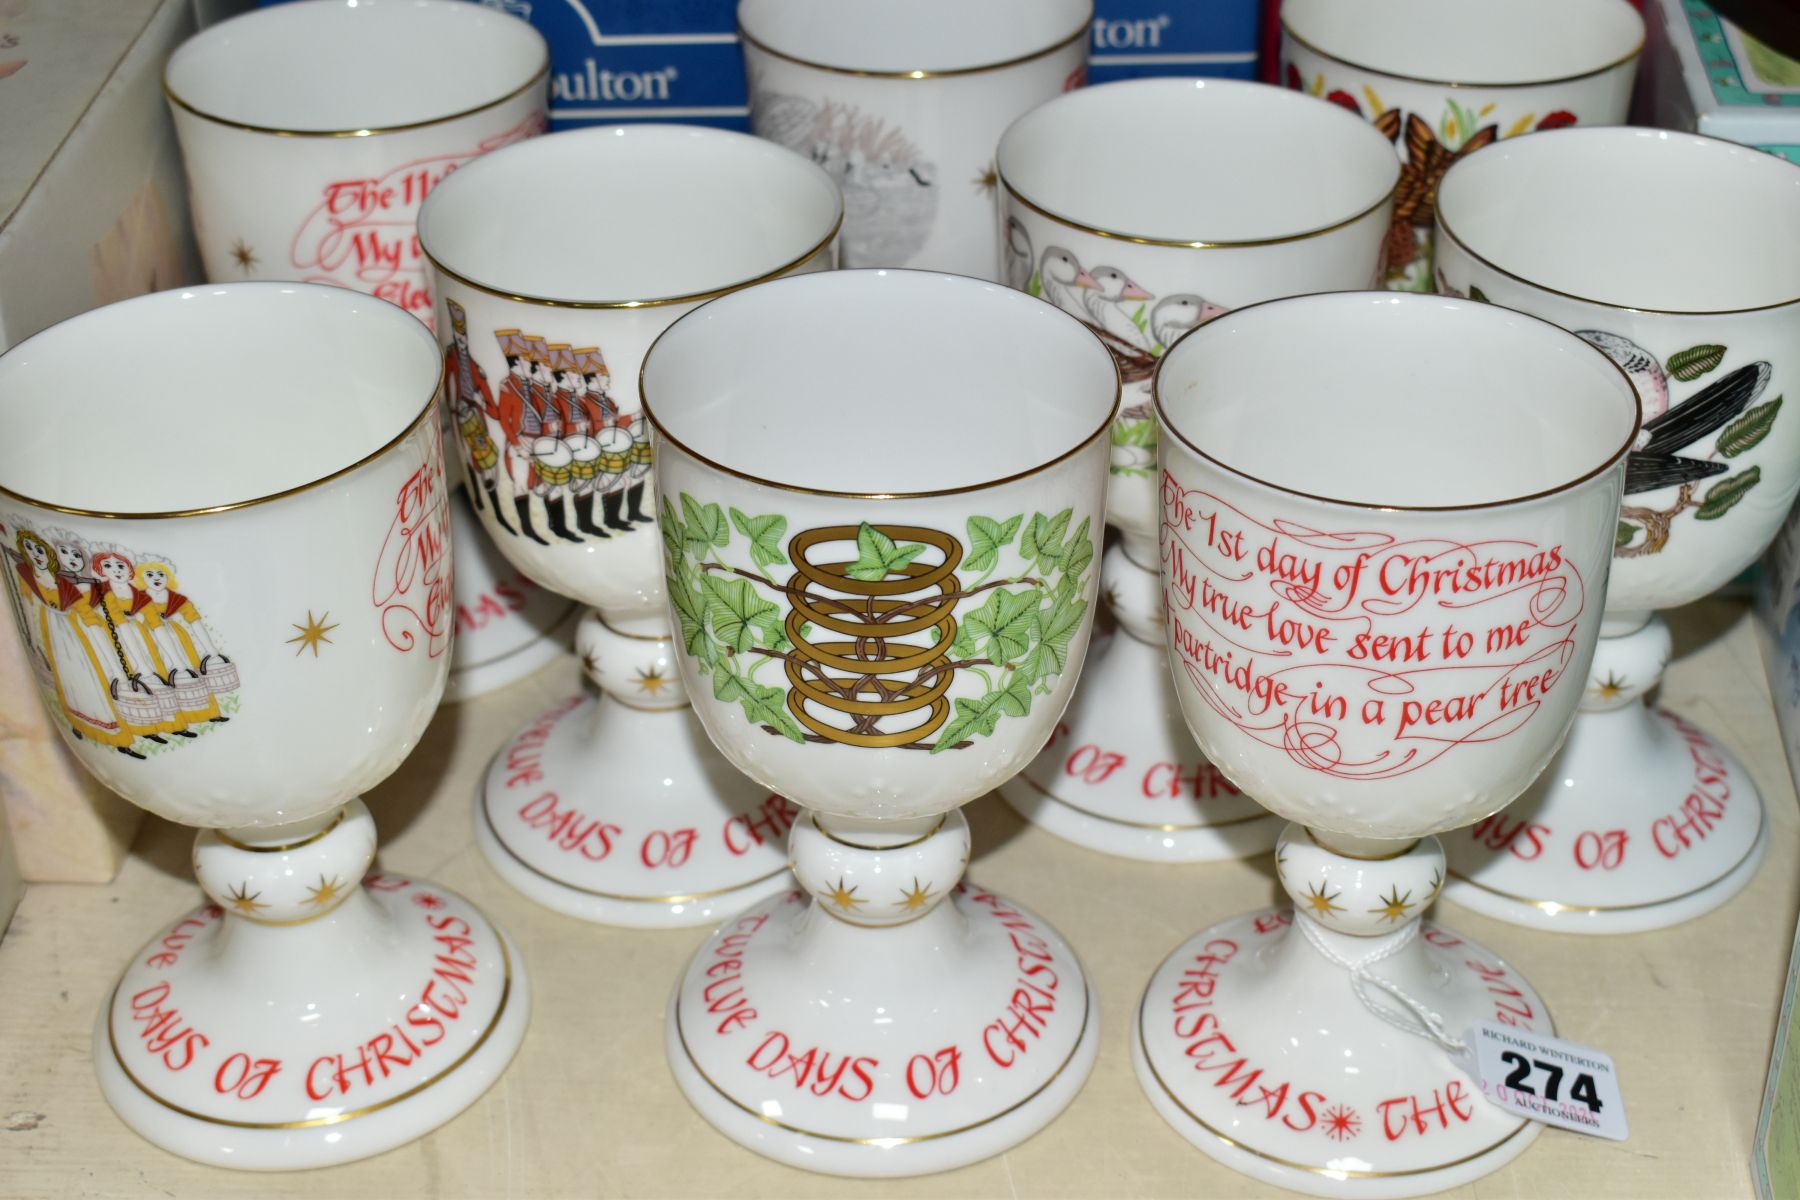 A SET OF TWELVE LIMITED EDITION ROYAL DOULTON GOBLETS, The Twelve Days of Christmas, limited to 10, - Image 2 of 6